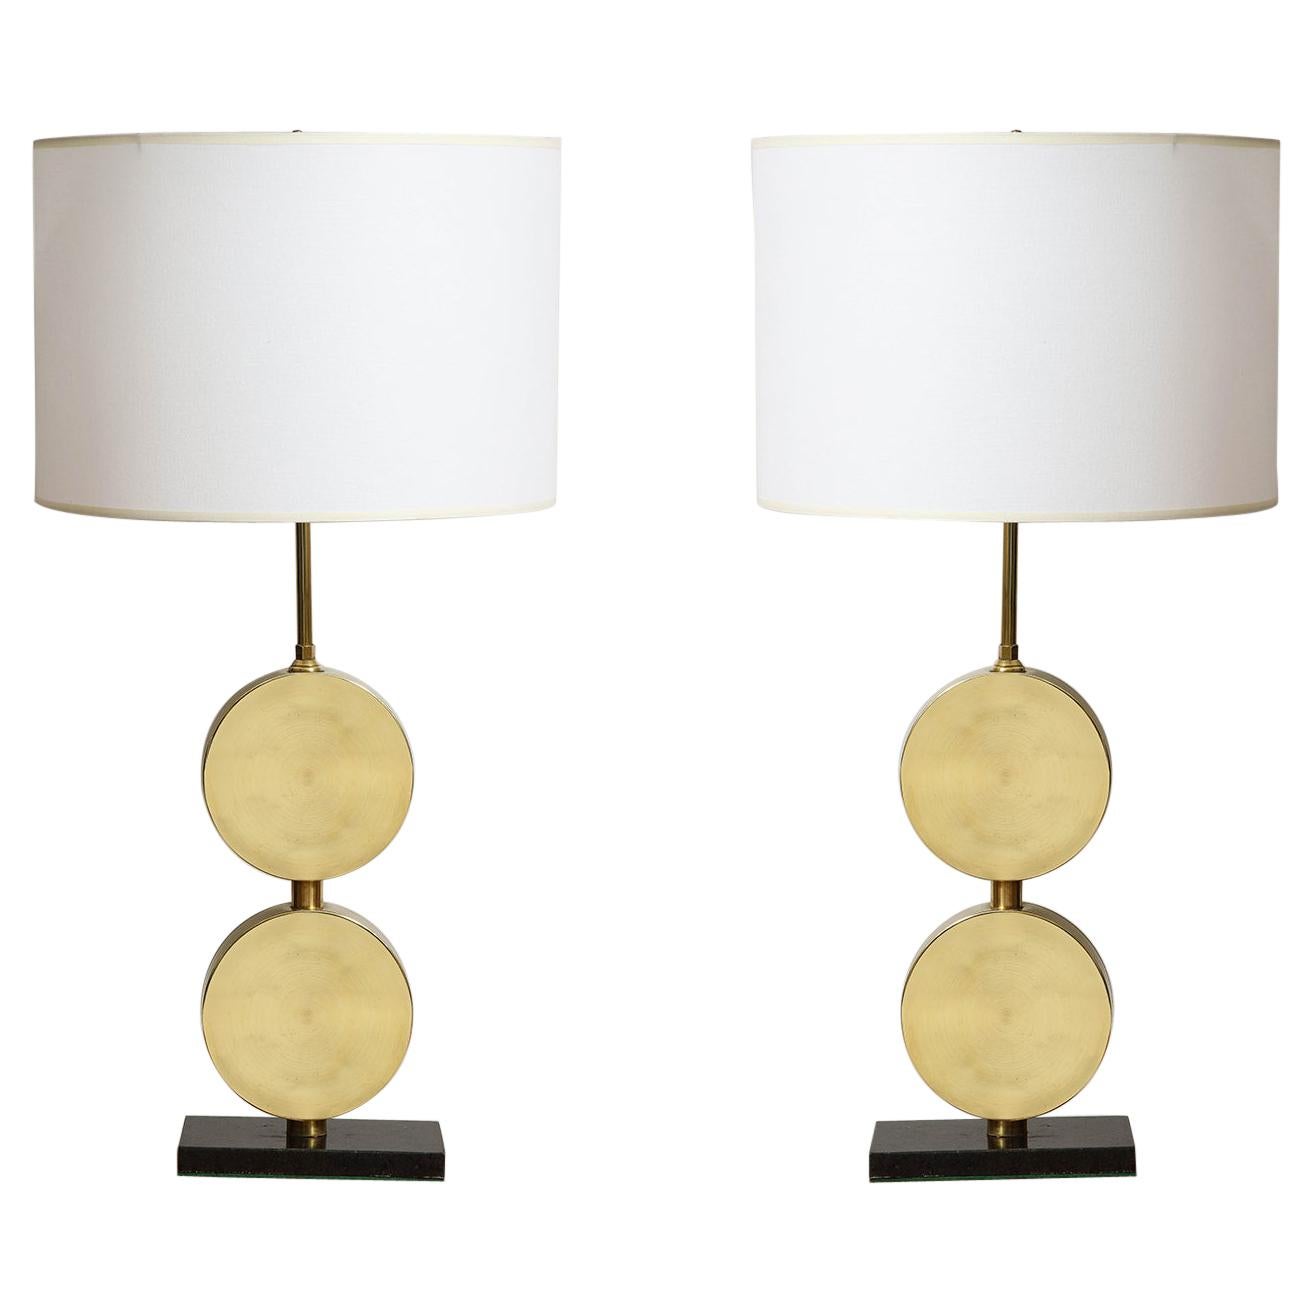 Pair of Sculptural Mid-Century Modern Brass Disc Lamps For Sale